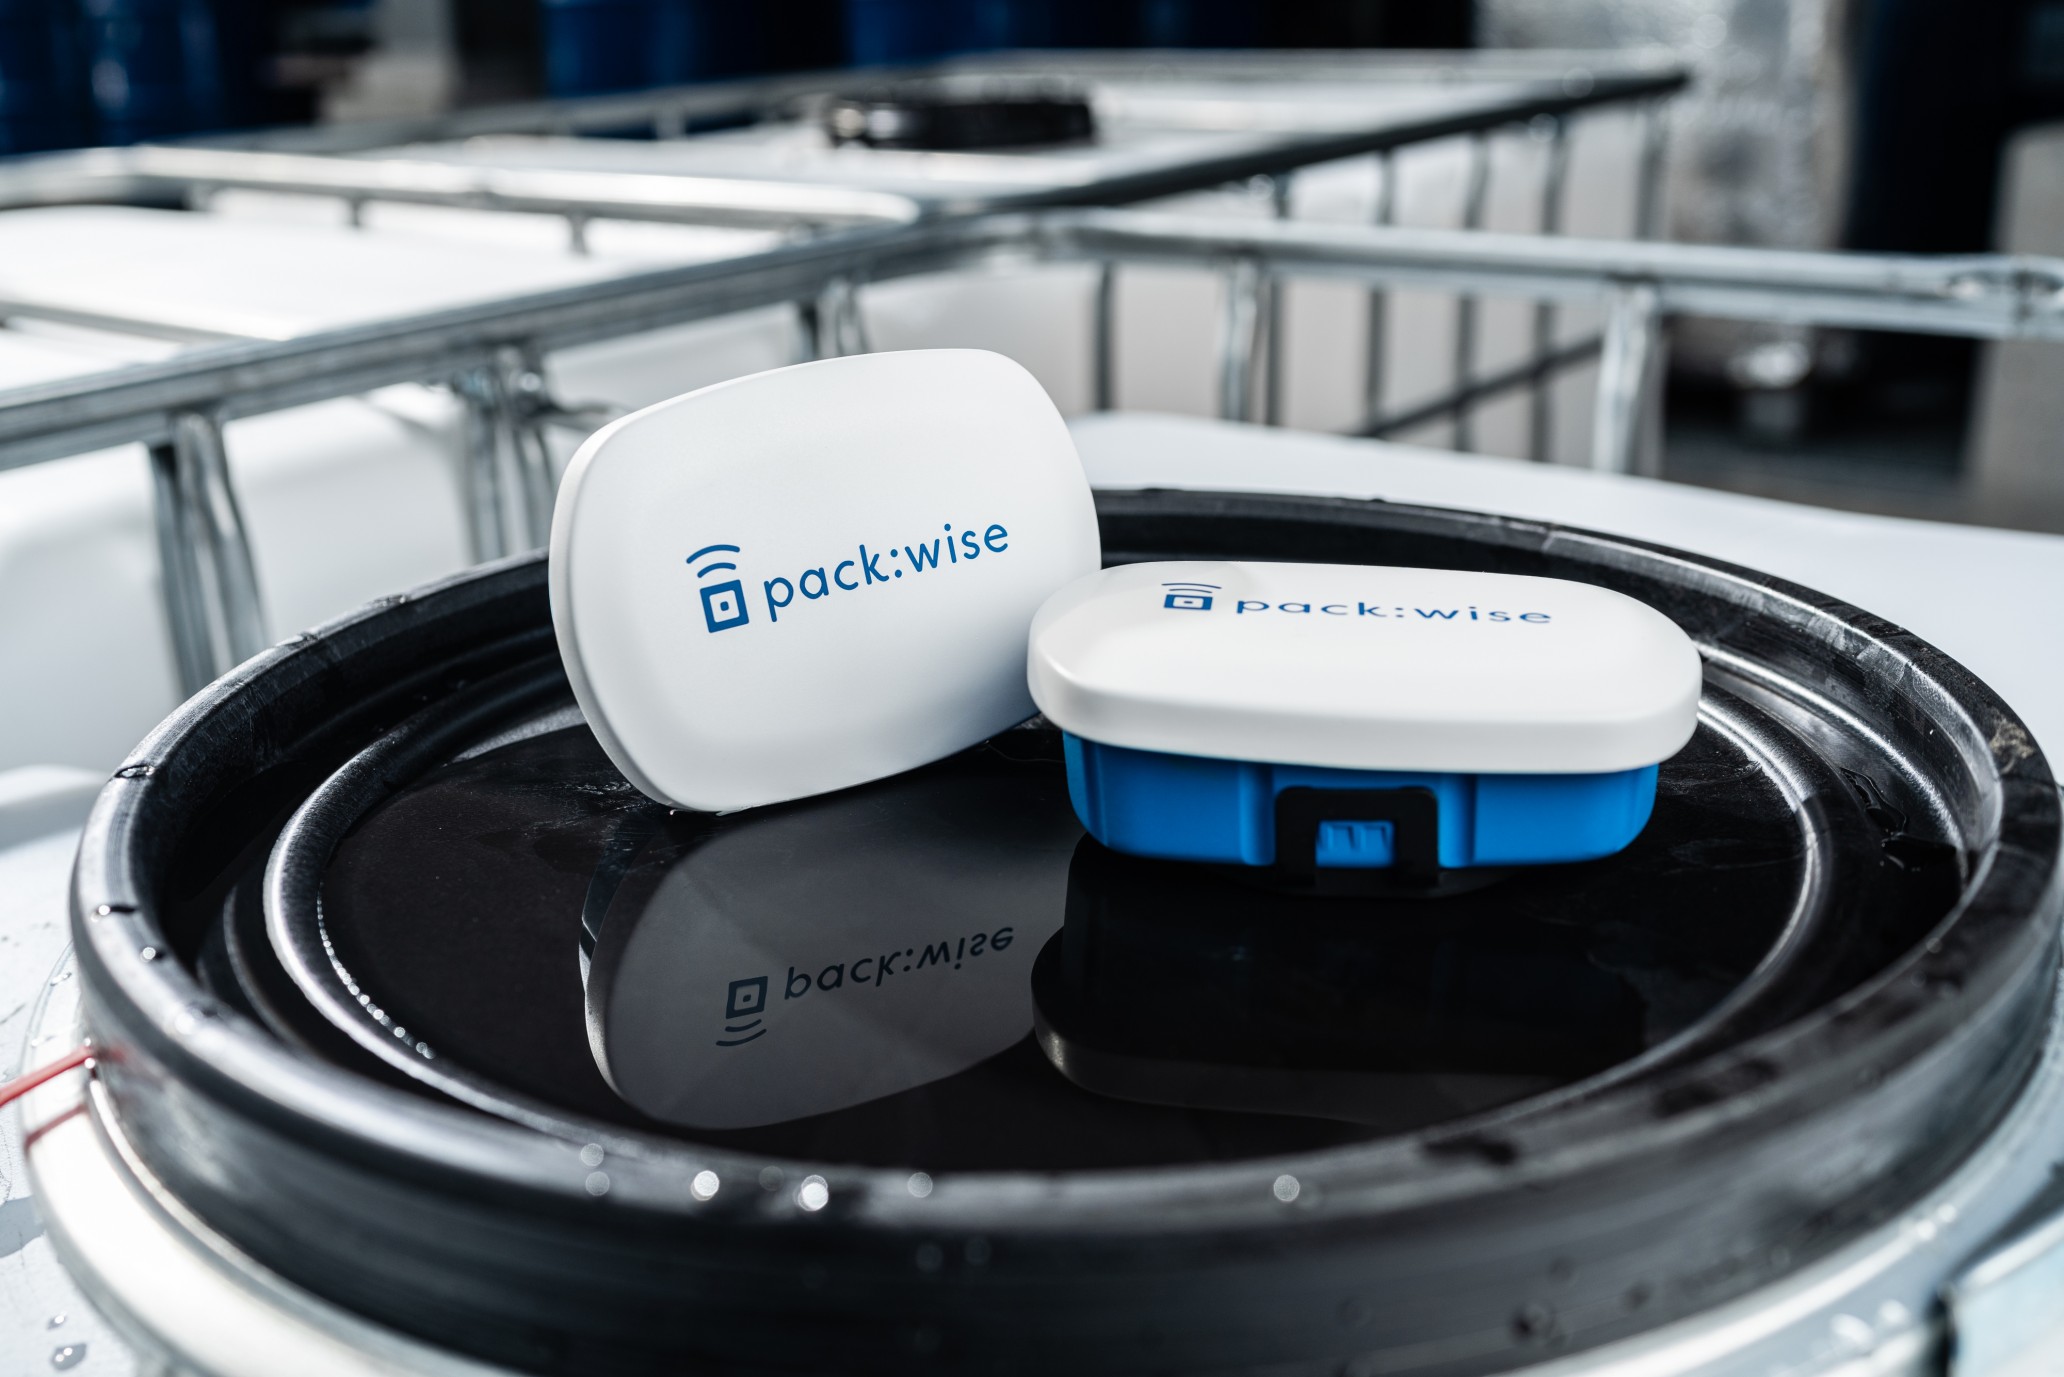 Packwise Pilots New Smart Sensor to Digitise the Chemical and Liquid Supply Chain